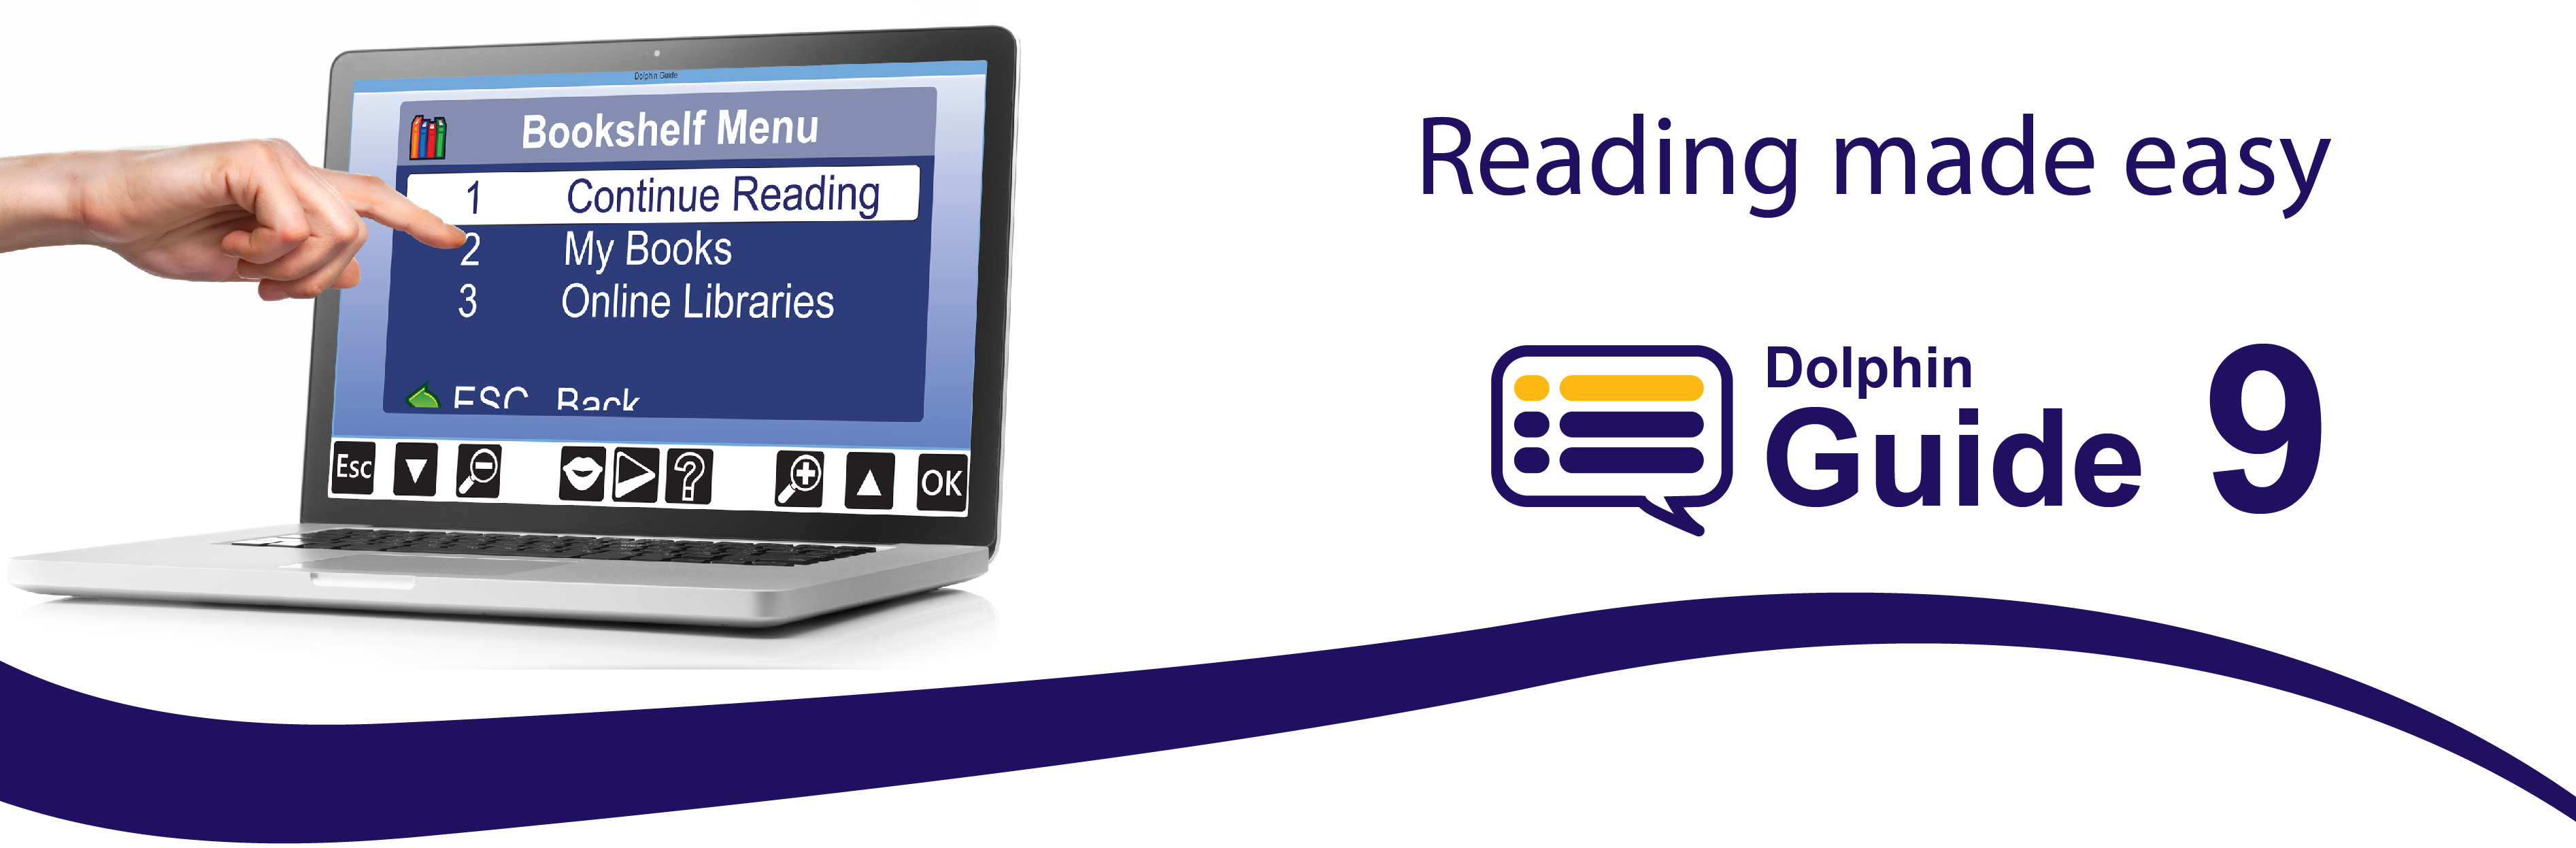 Guide Bookshelf menu displayed on a touch screen with keyboard. Text reads "Reading made easy" with Guide 9